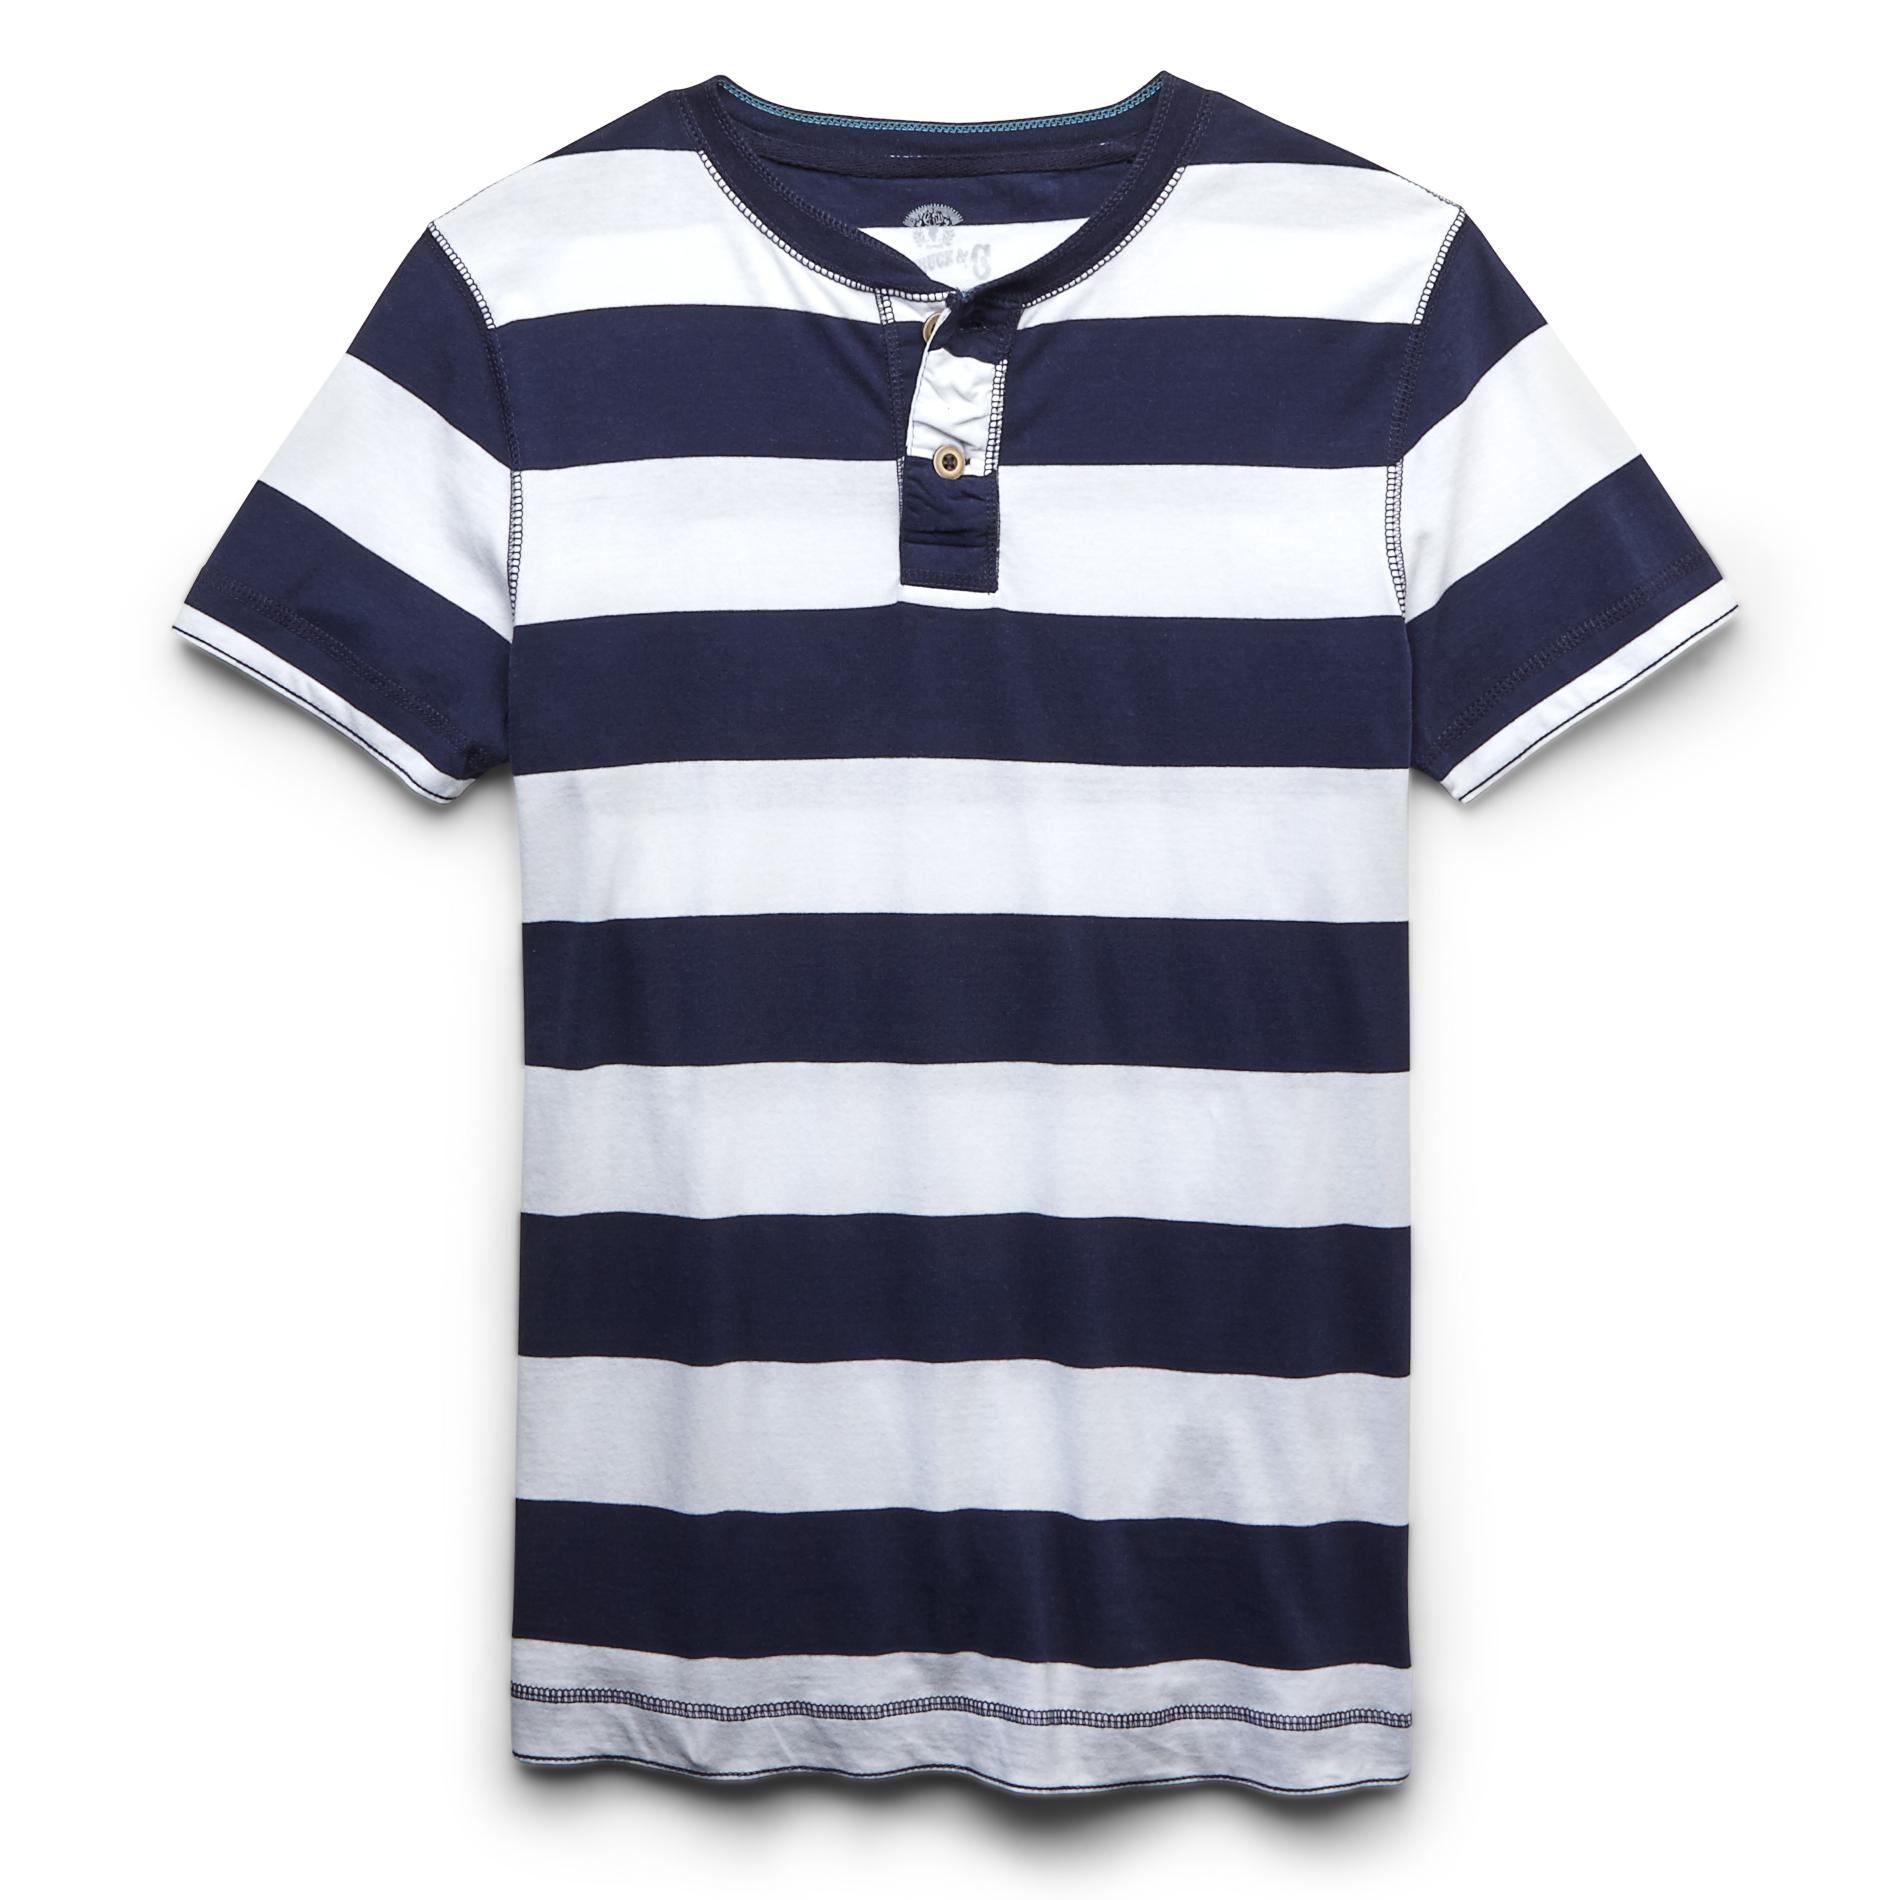 Roebuck & Co. Young Men's Henley Shirt - Rugby Striped